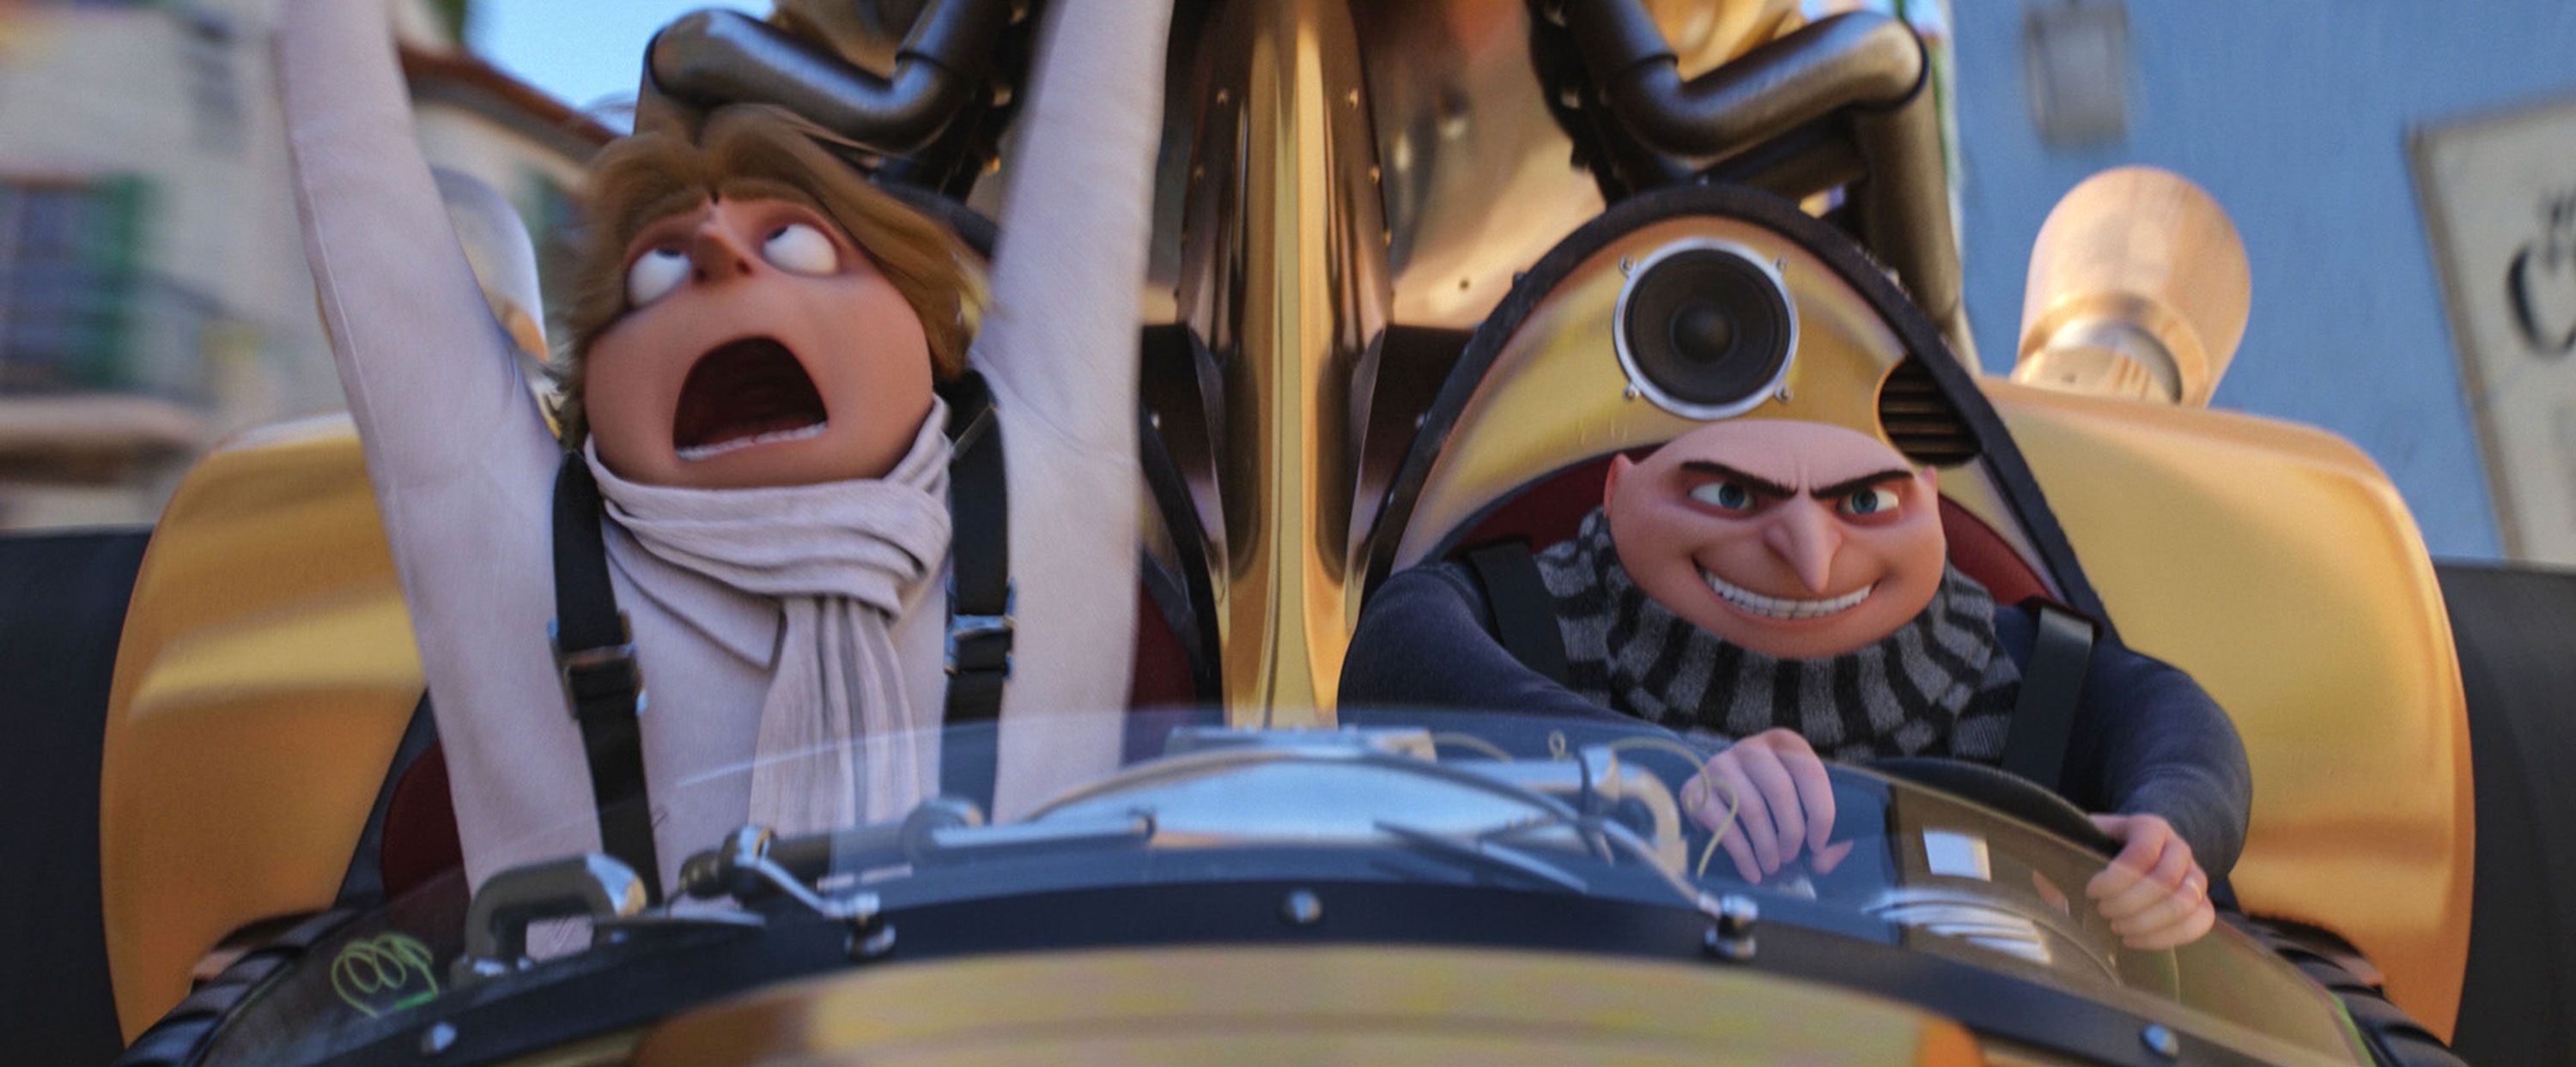 Gru Has Sibling Envy In The New Despicable Me 3 Trailer | Movies |  %%channel_name%%